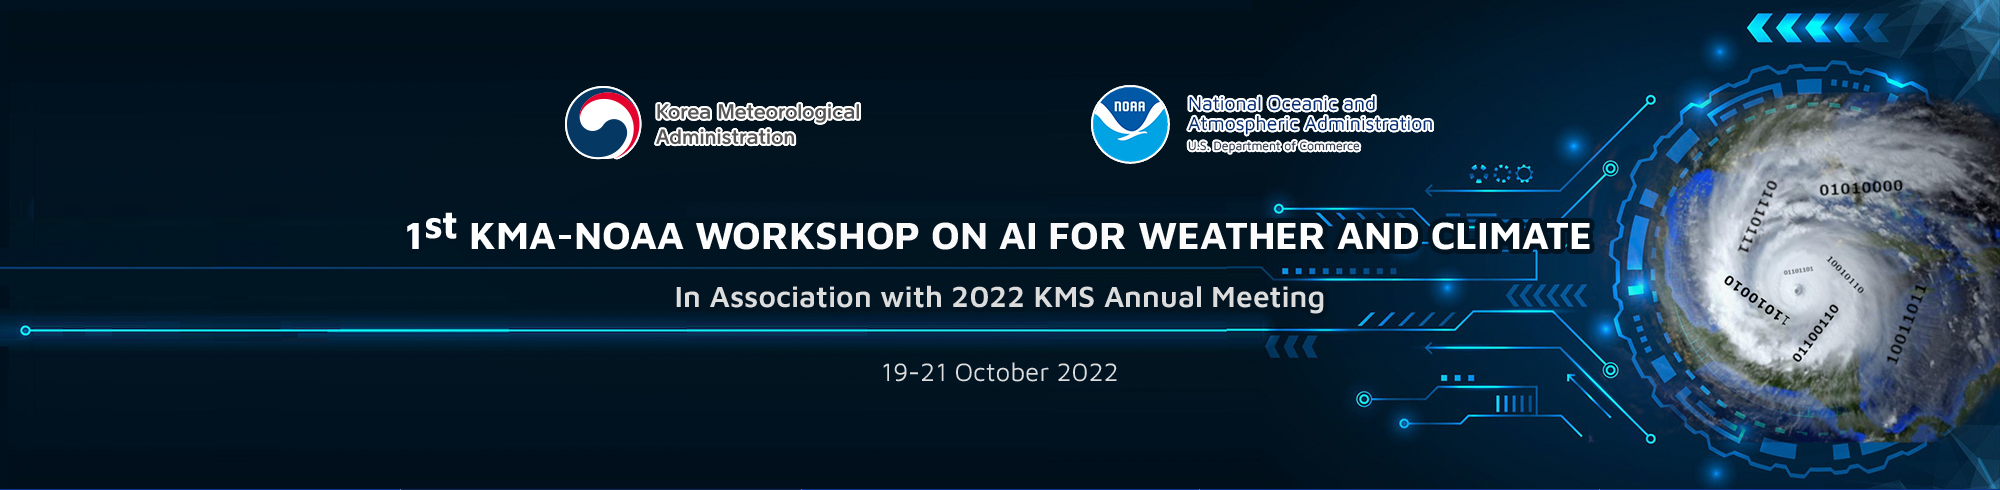 1st KMA-NOAA Workshop on AI for Weater and Climate